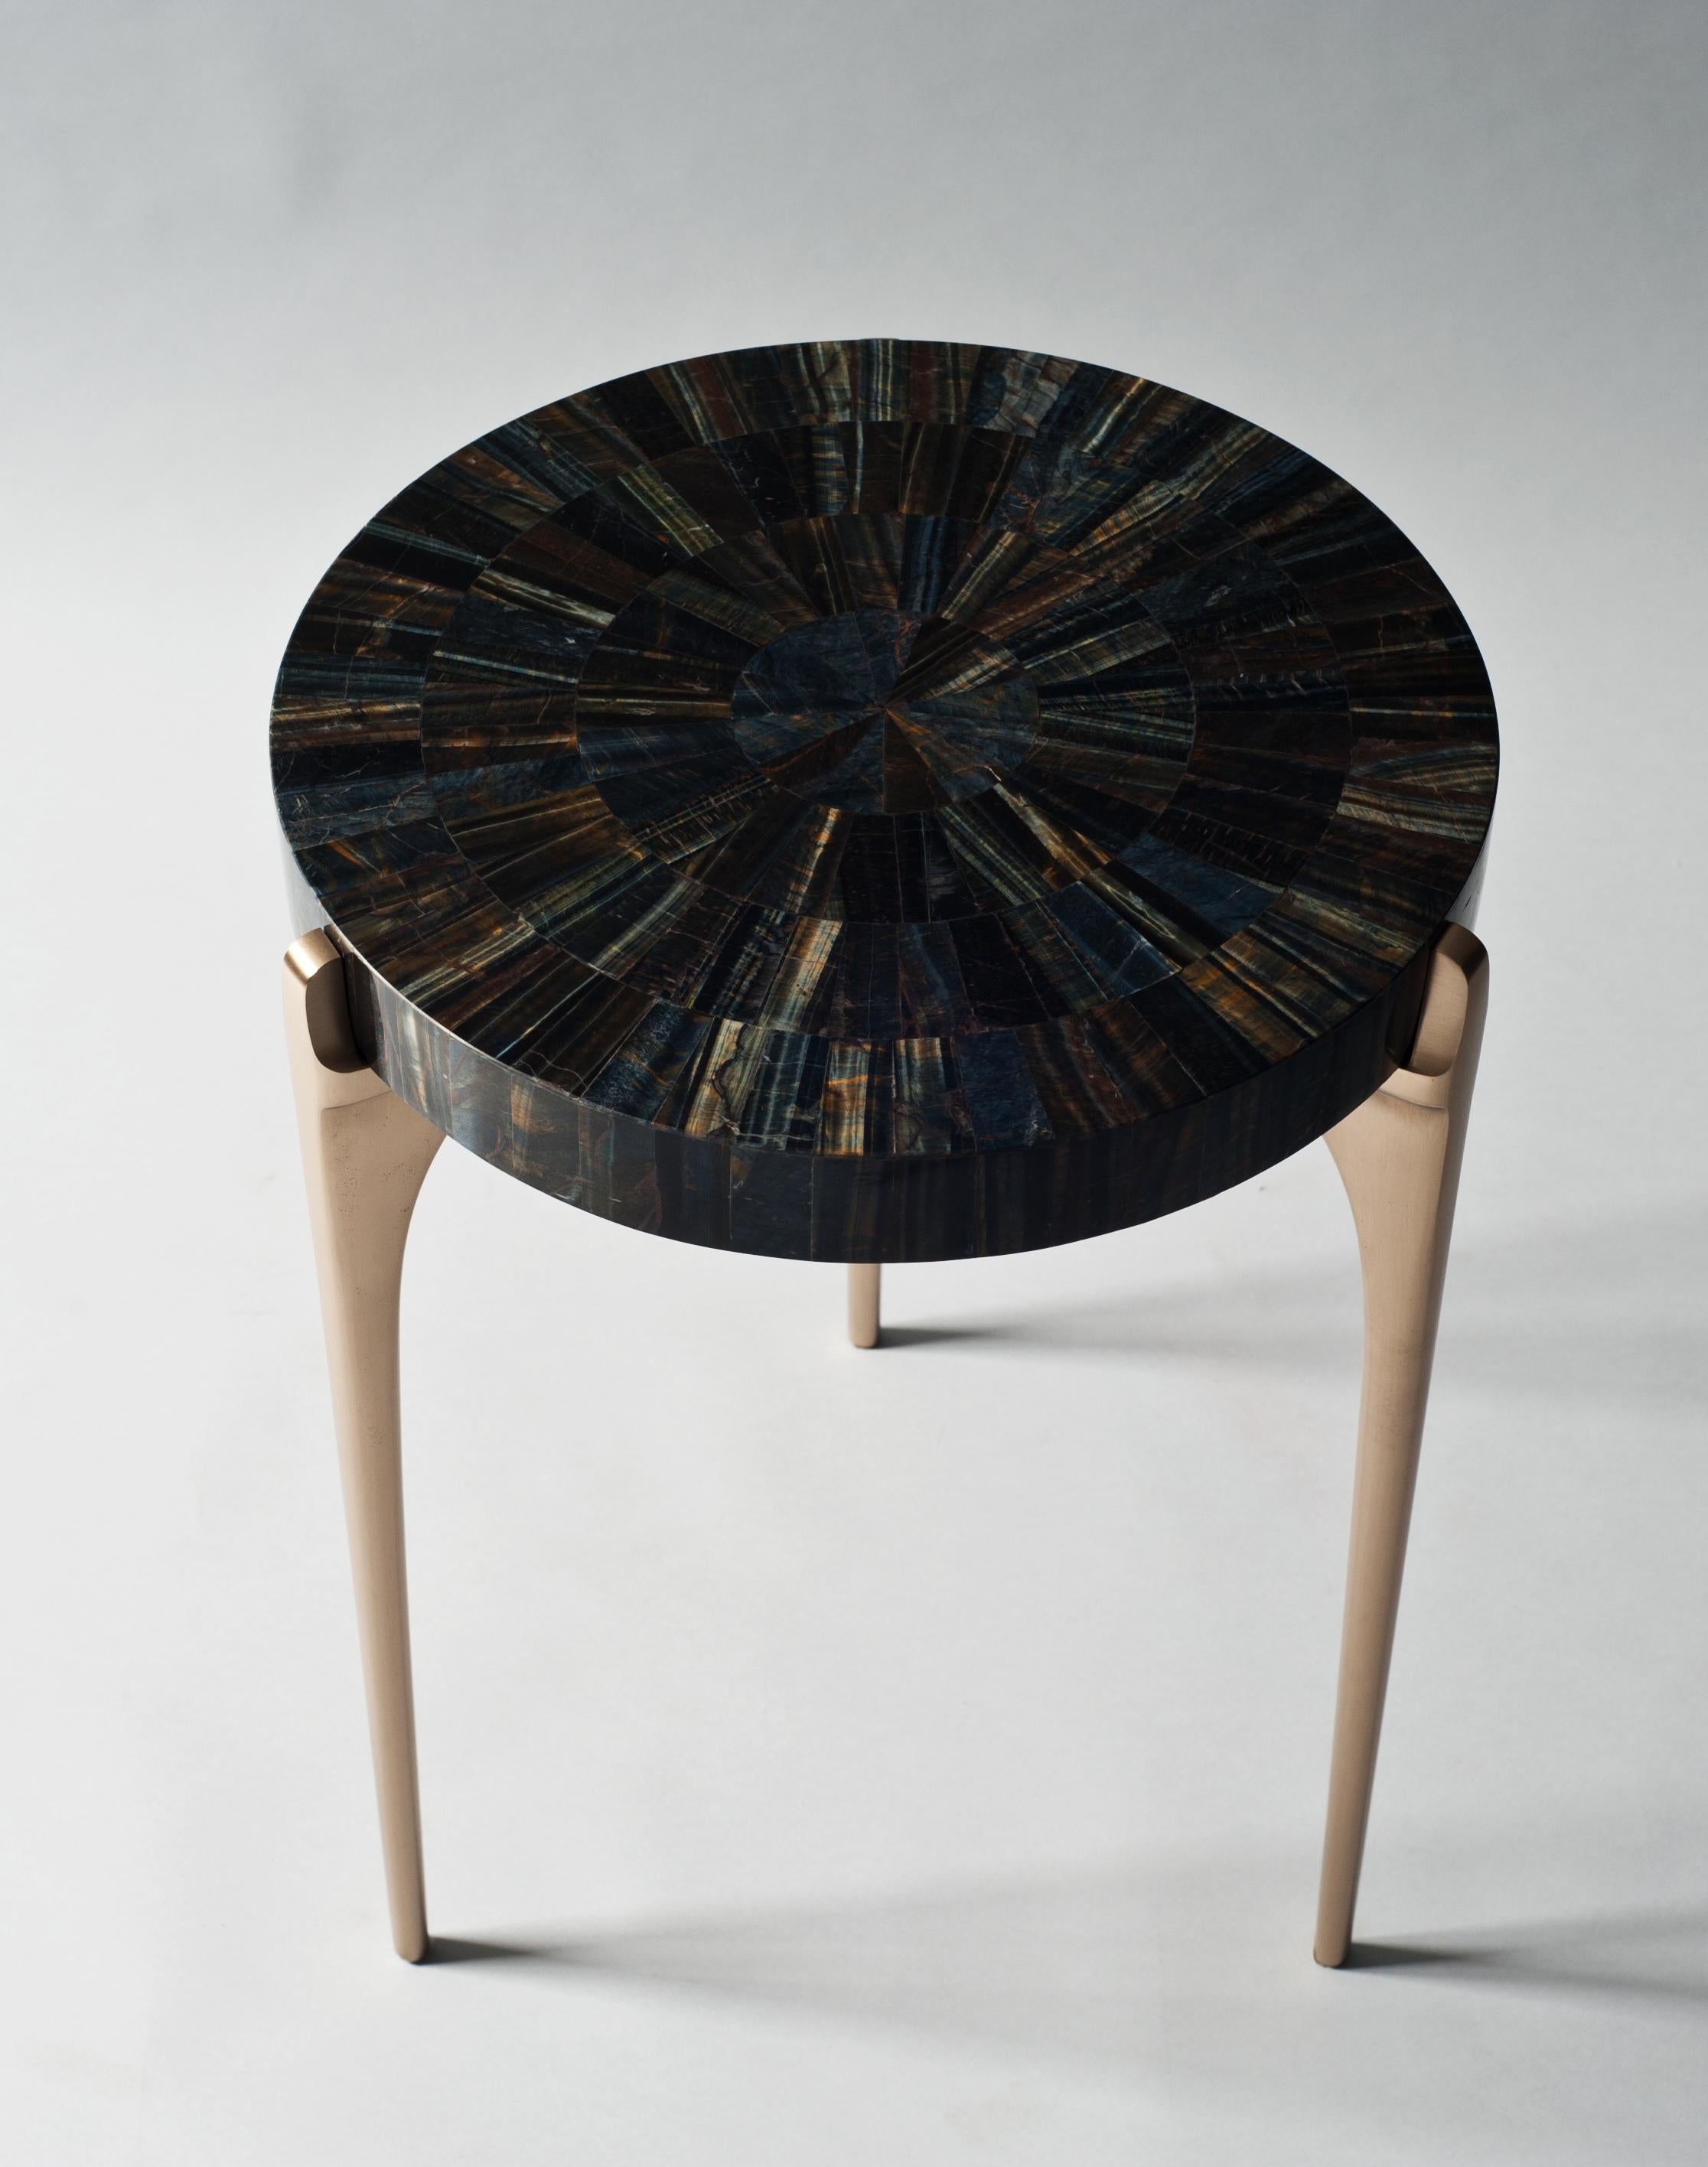 Acantha side table by DeMuro Das 
Dimensions: 41.5 x 55.25 cm
Materials: Tiger's Eye (Blue) - Polished (Tiled) Tabletop
 Solid Bronze - Satin legs

Dimensions and finishes can be customized.

DeMuro Das is an international design firm and the